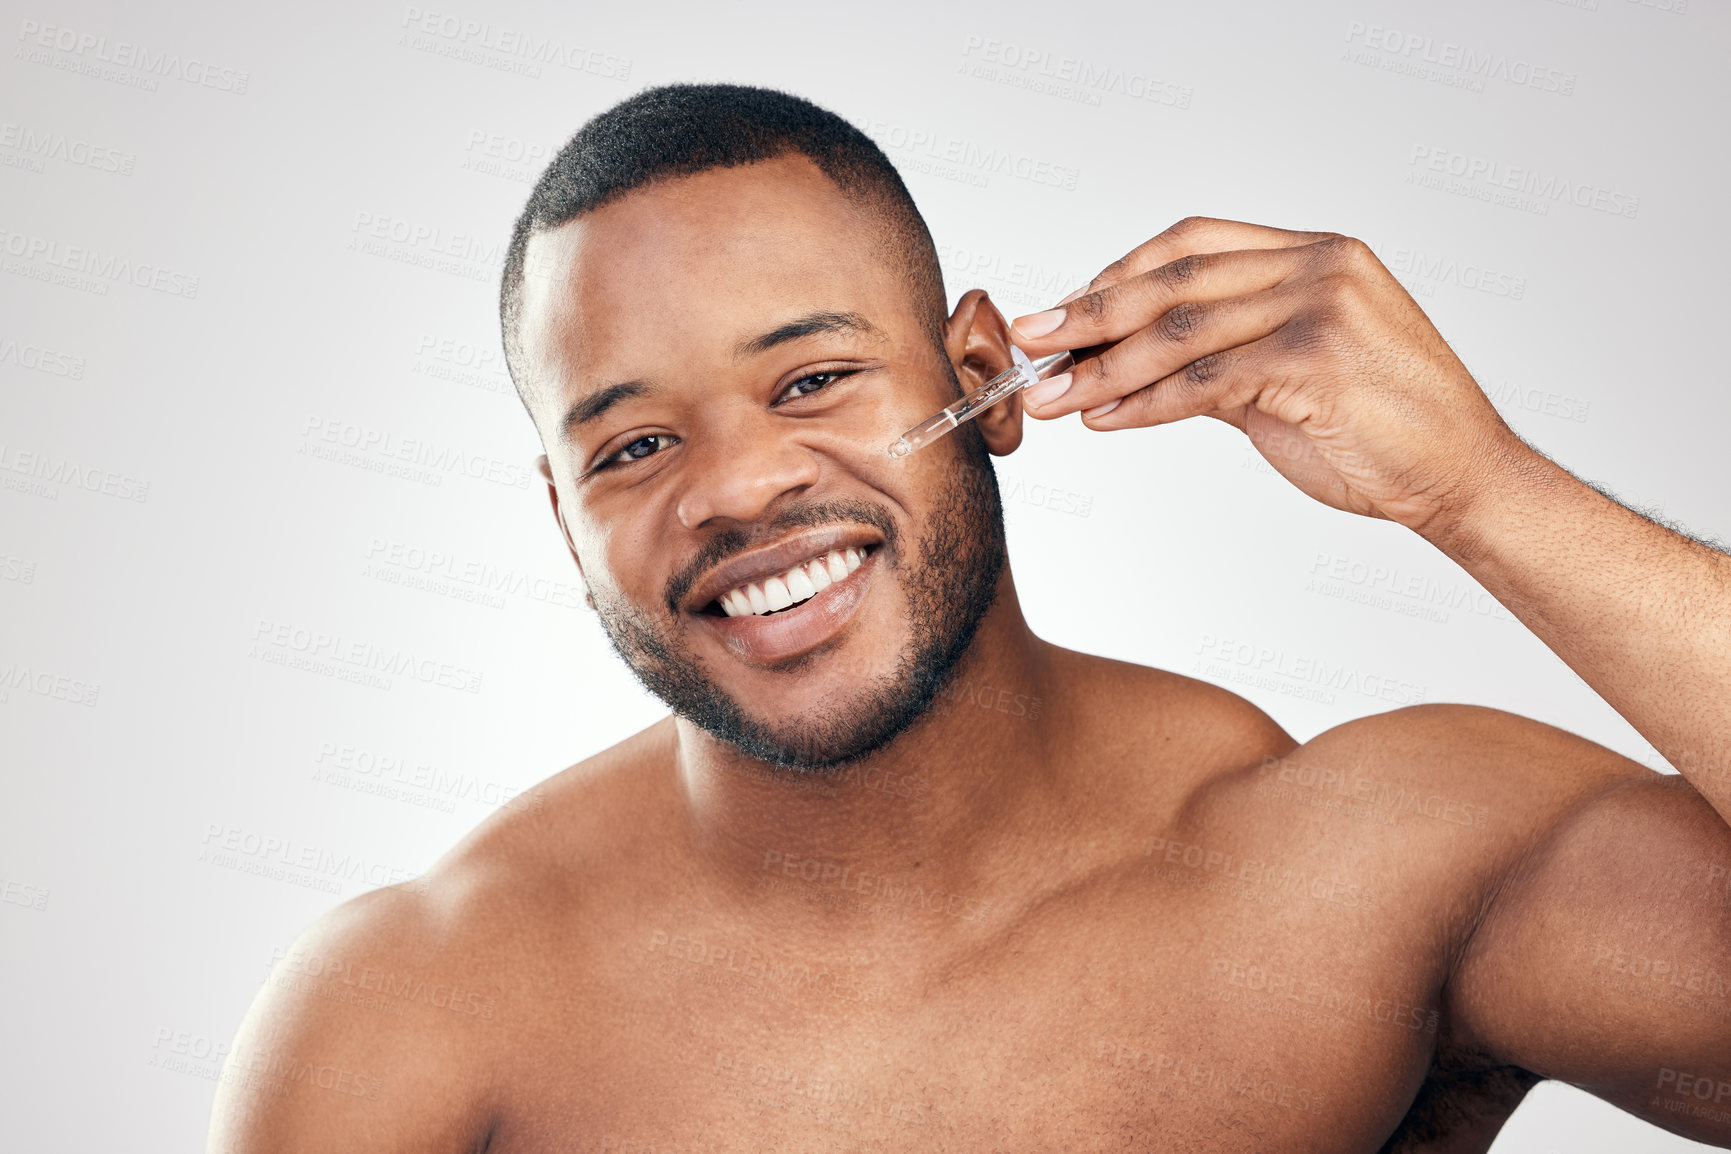 Buy stock photo Studio portrait of a handsome young man applying serum to his face with a dropper against a white background